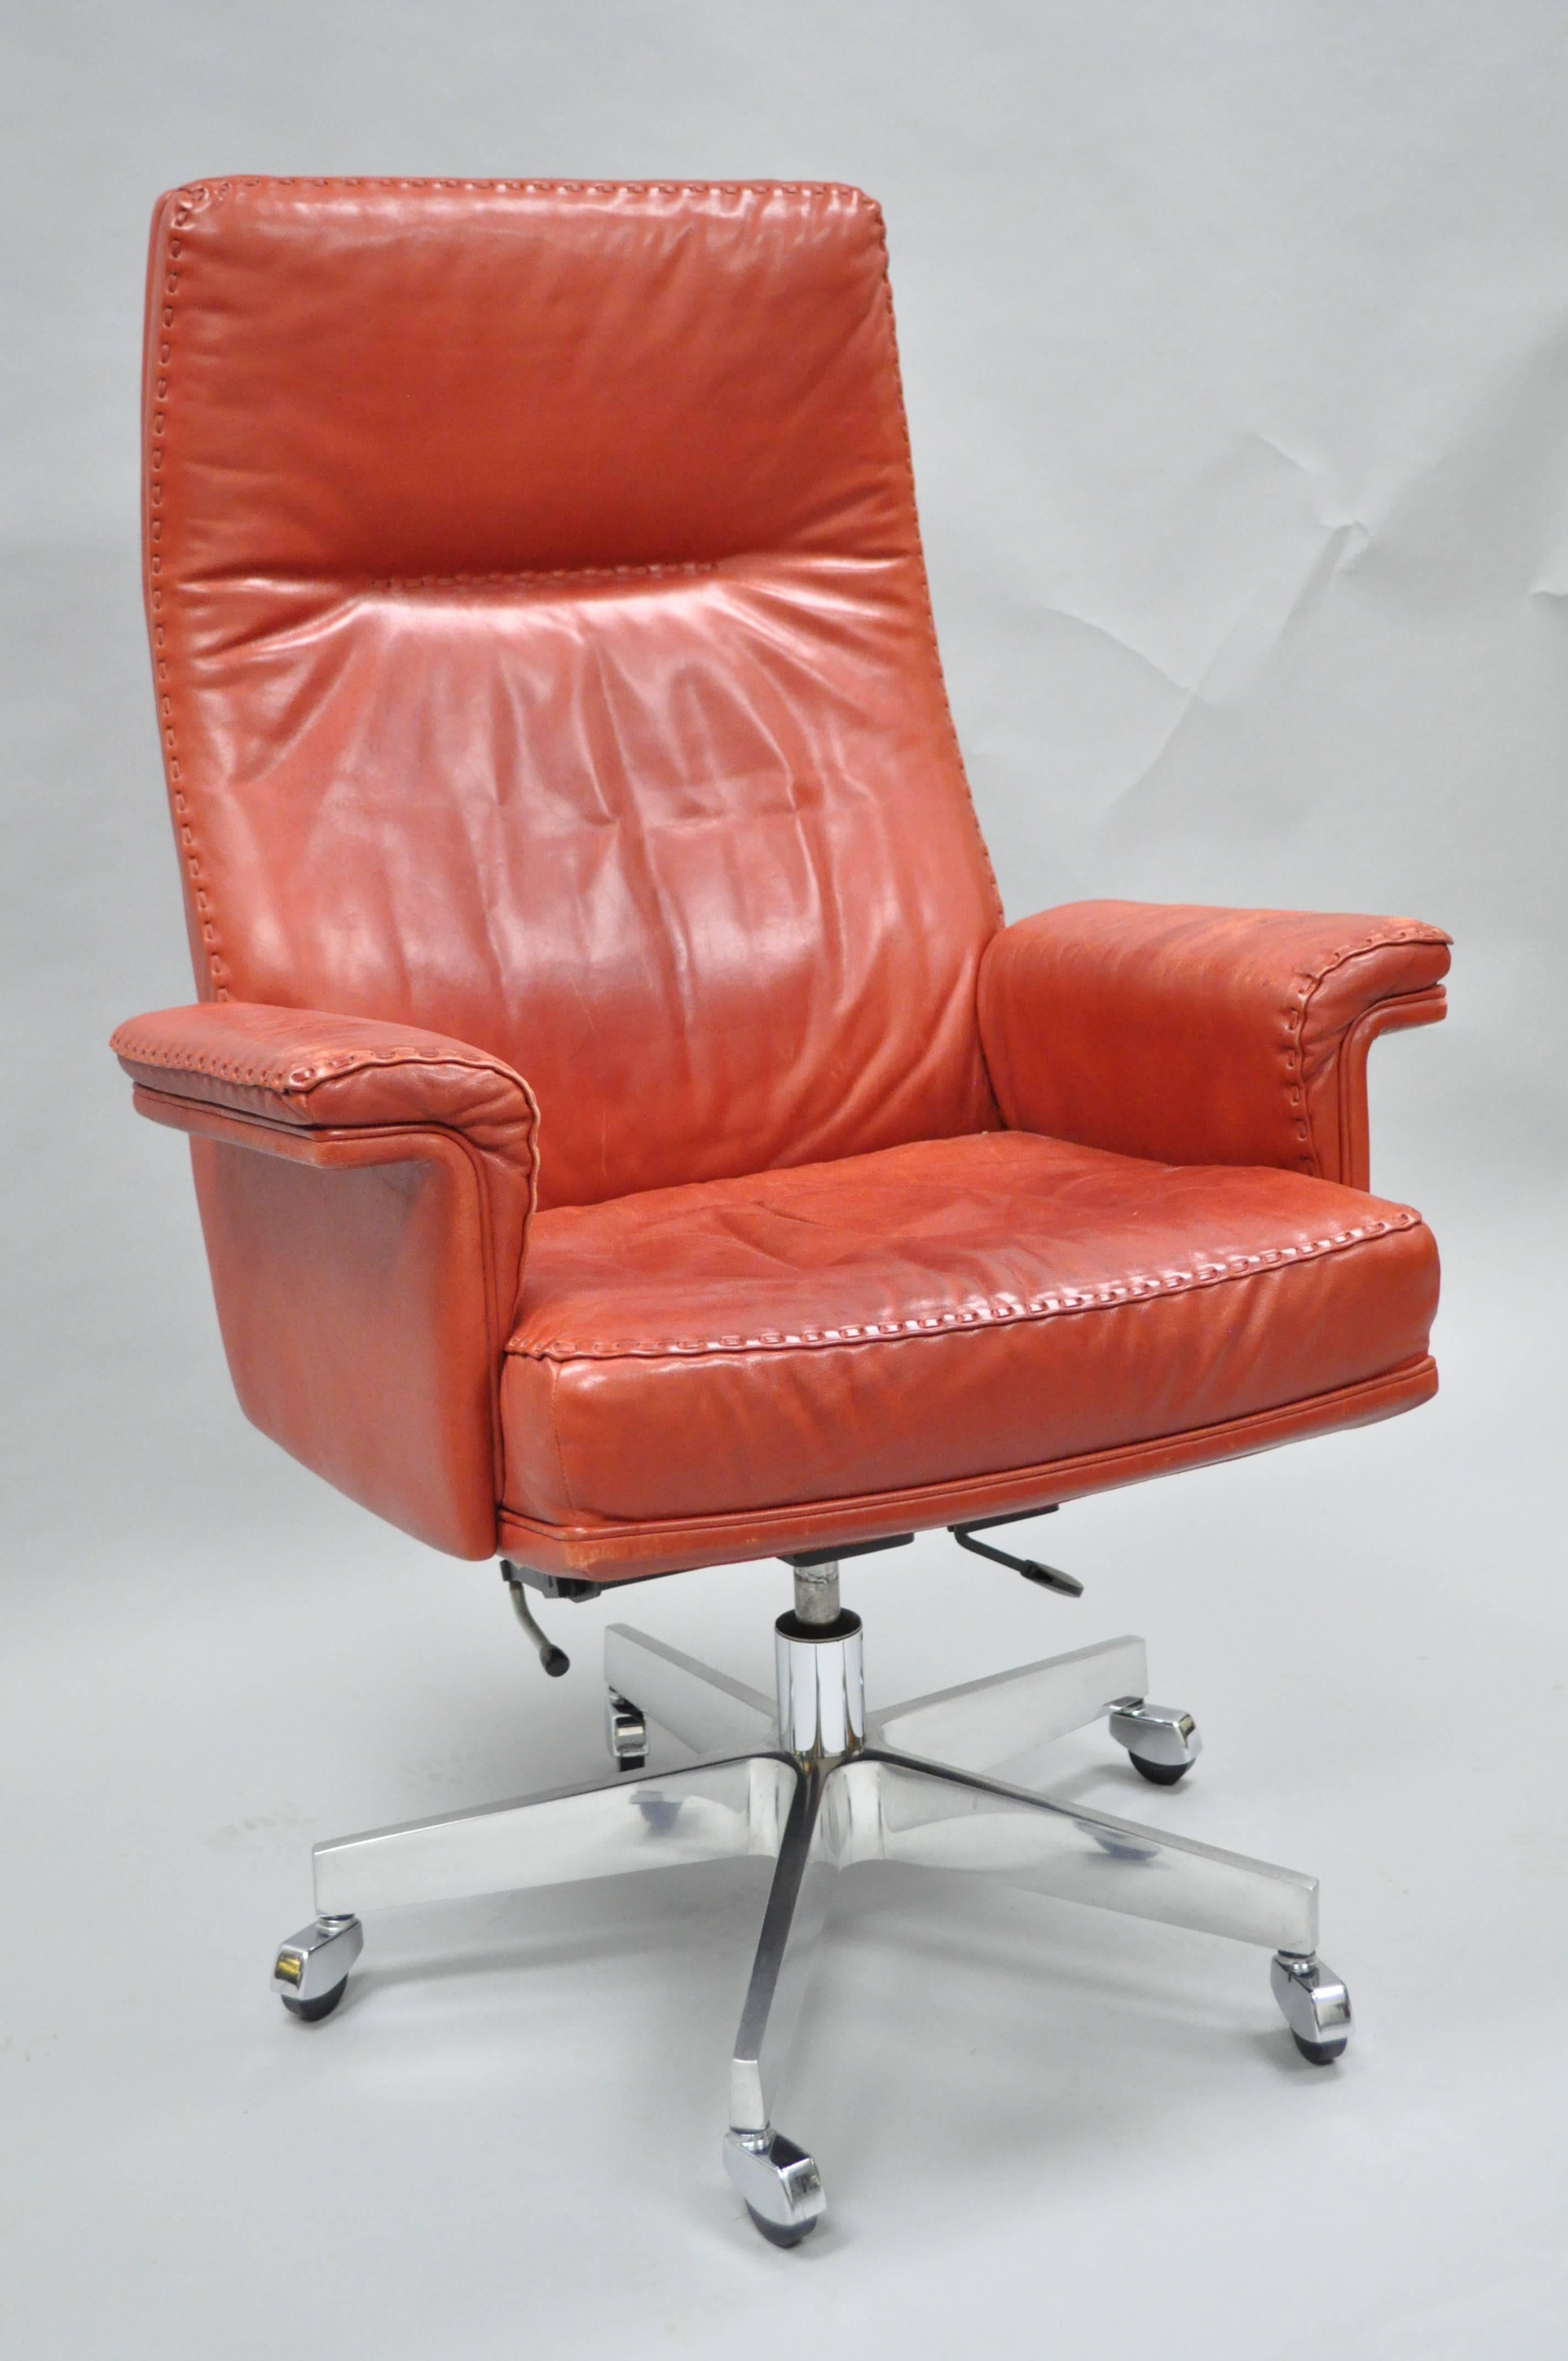 Stunning vintage 1960s De Sede DS 35 red leather and chrome tall back executive swivel office desk chair on casters. Item features a very comfortable form, red aniline leather upholstery with whipstitch edge detail, polished chrome-plated steel base